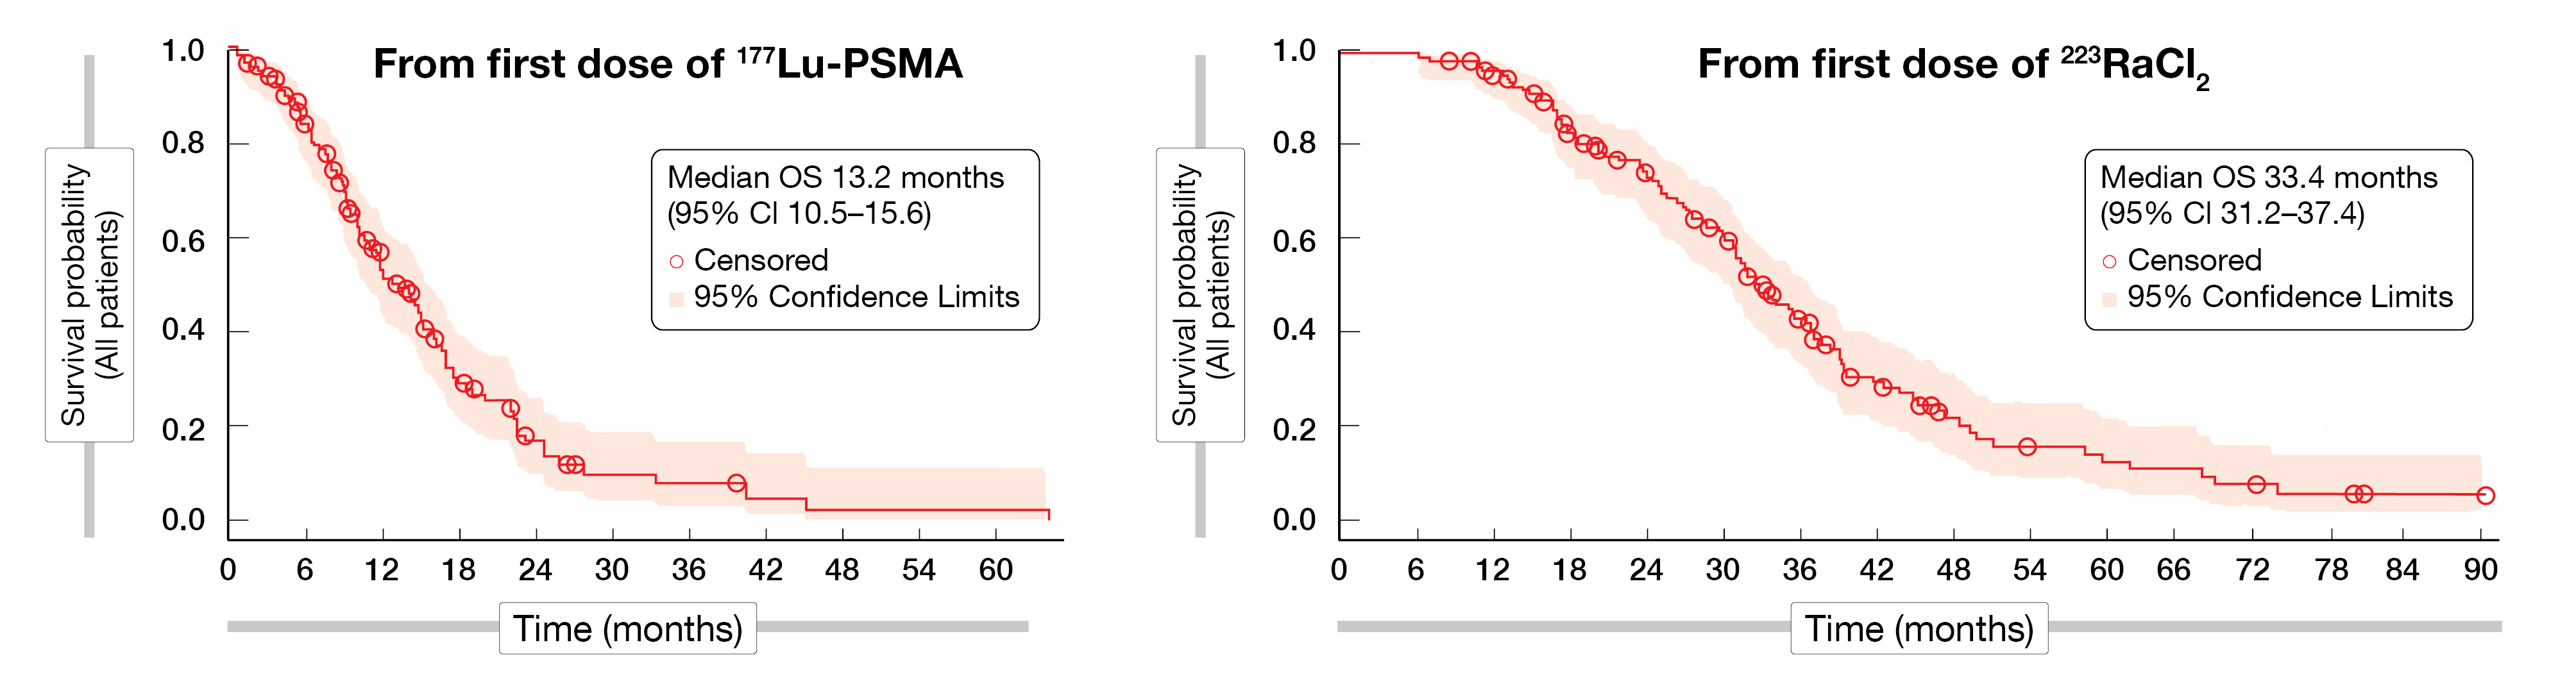 Figure 1: Overall survival with Lu-PSMA treatment since the first dose of Lu-PSMA (left) and the first dose of 223RaCl2 (right) in the RALU study